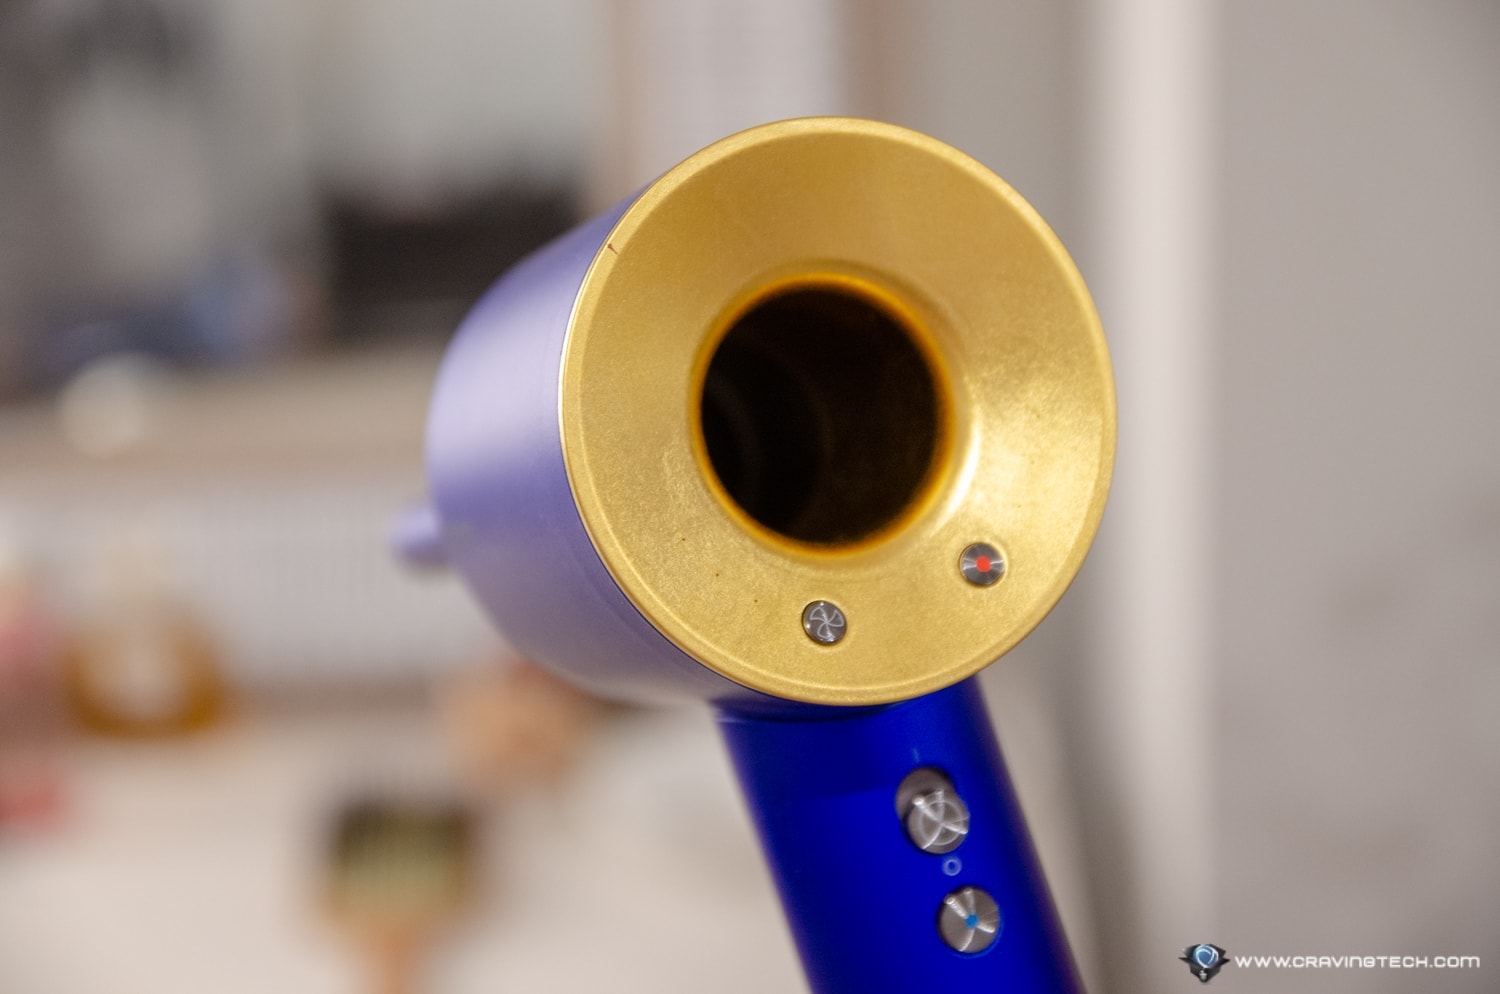 Dyson Supersonic Limited Edition in Gold